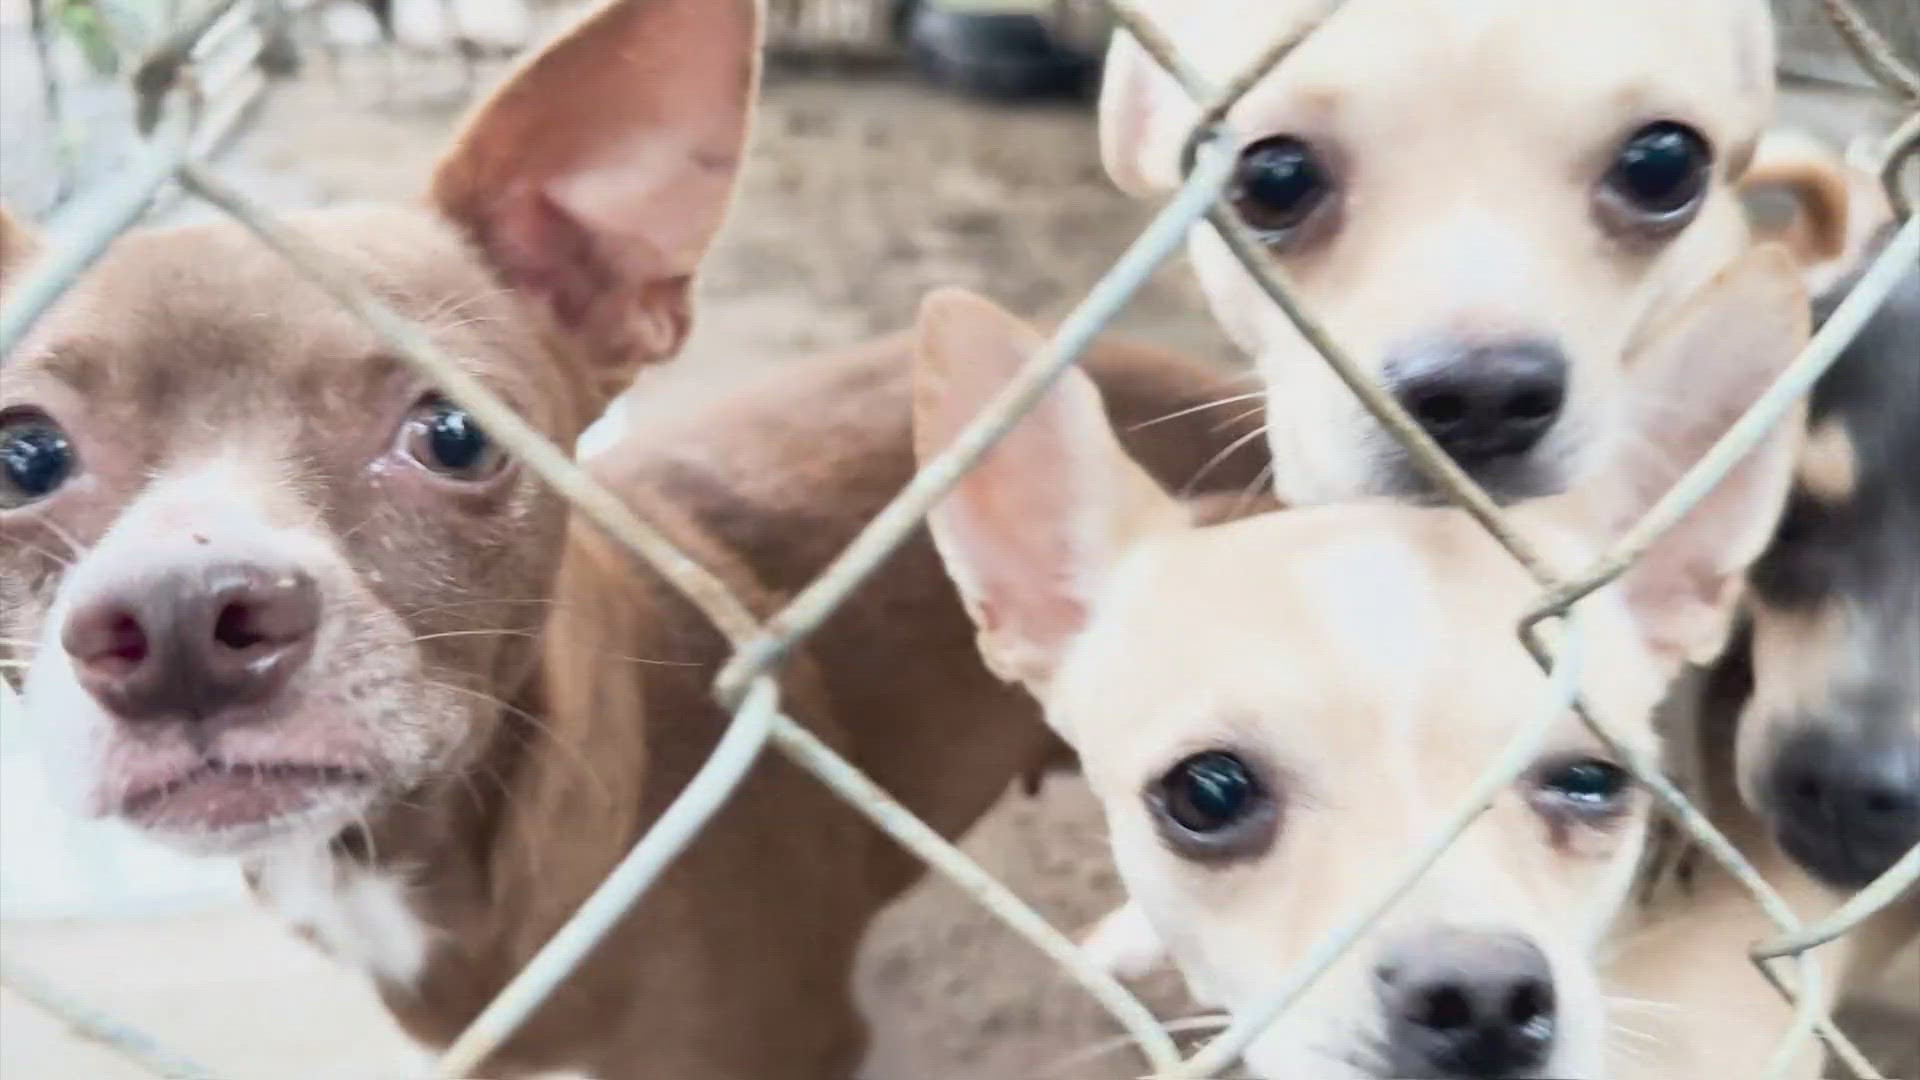 The dogs were rescued in Weimar, Texas, which is about an hour west of Houston in Colorado County. Most of the dogs had been kept outside.